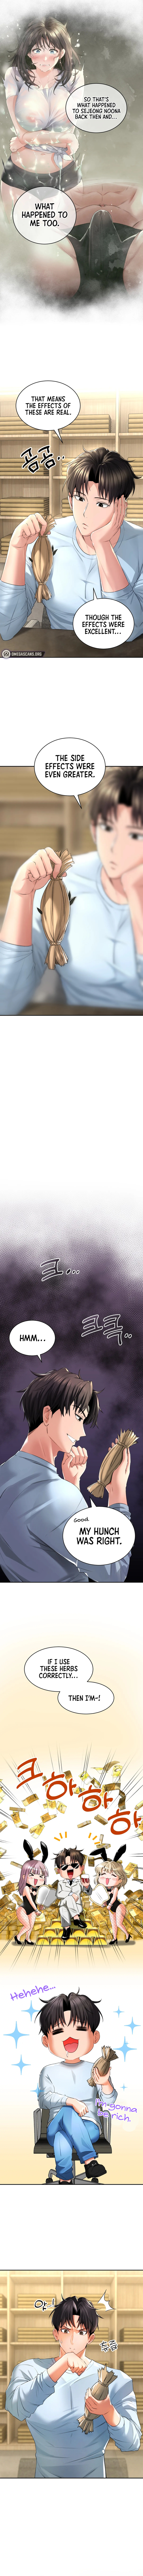 [Lee Juwon] Herbal Love Story (1-44) [English] [Omega Scans] [Ongoing] - Page 33